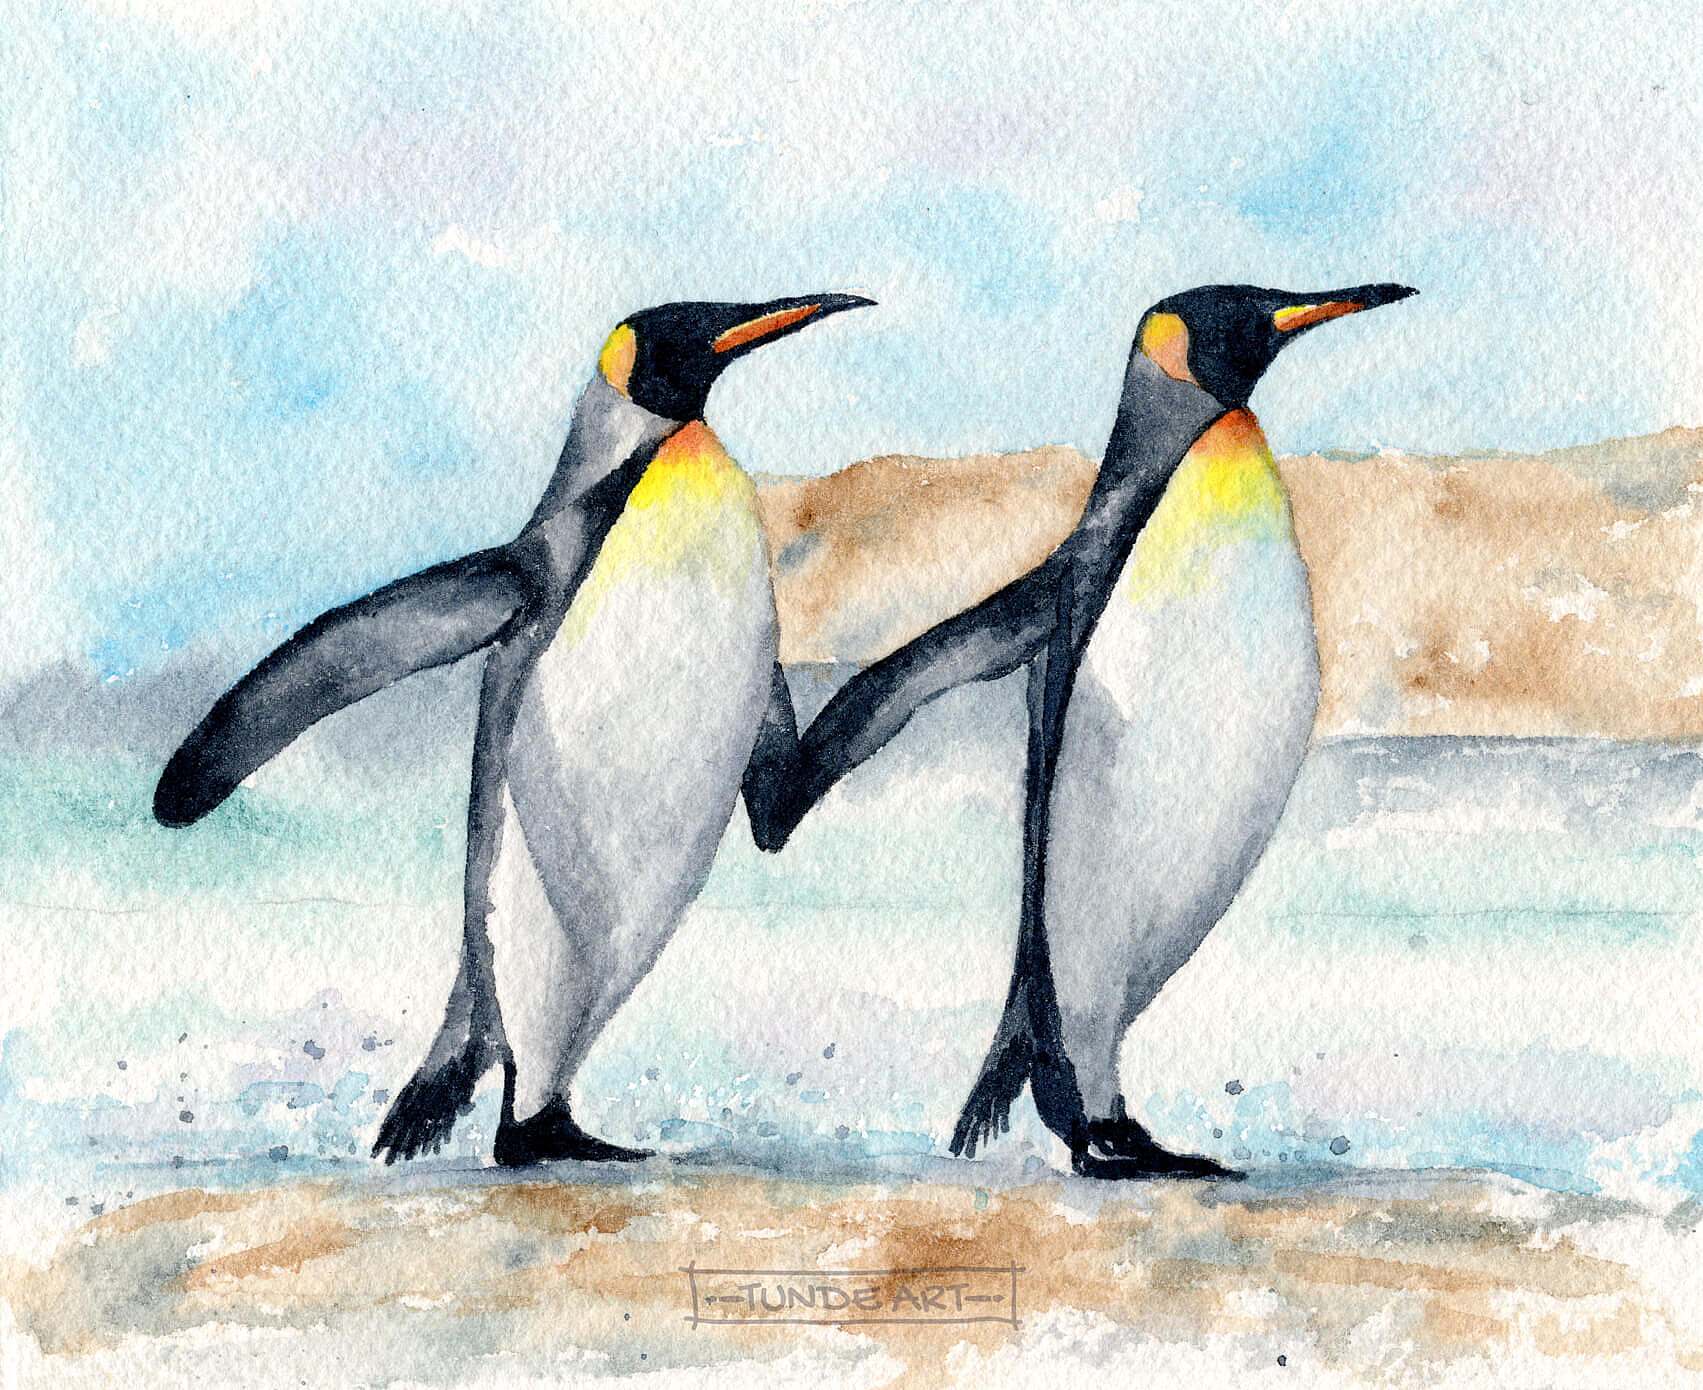 Penguin Love by Tunde Art